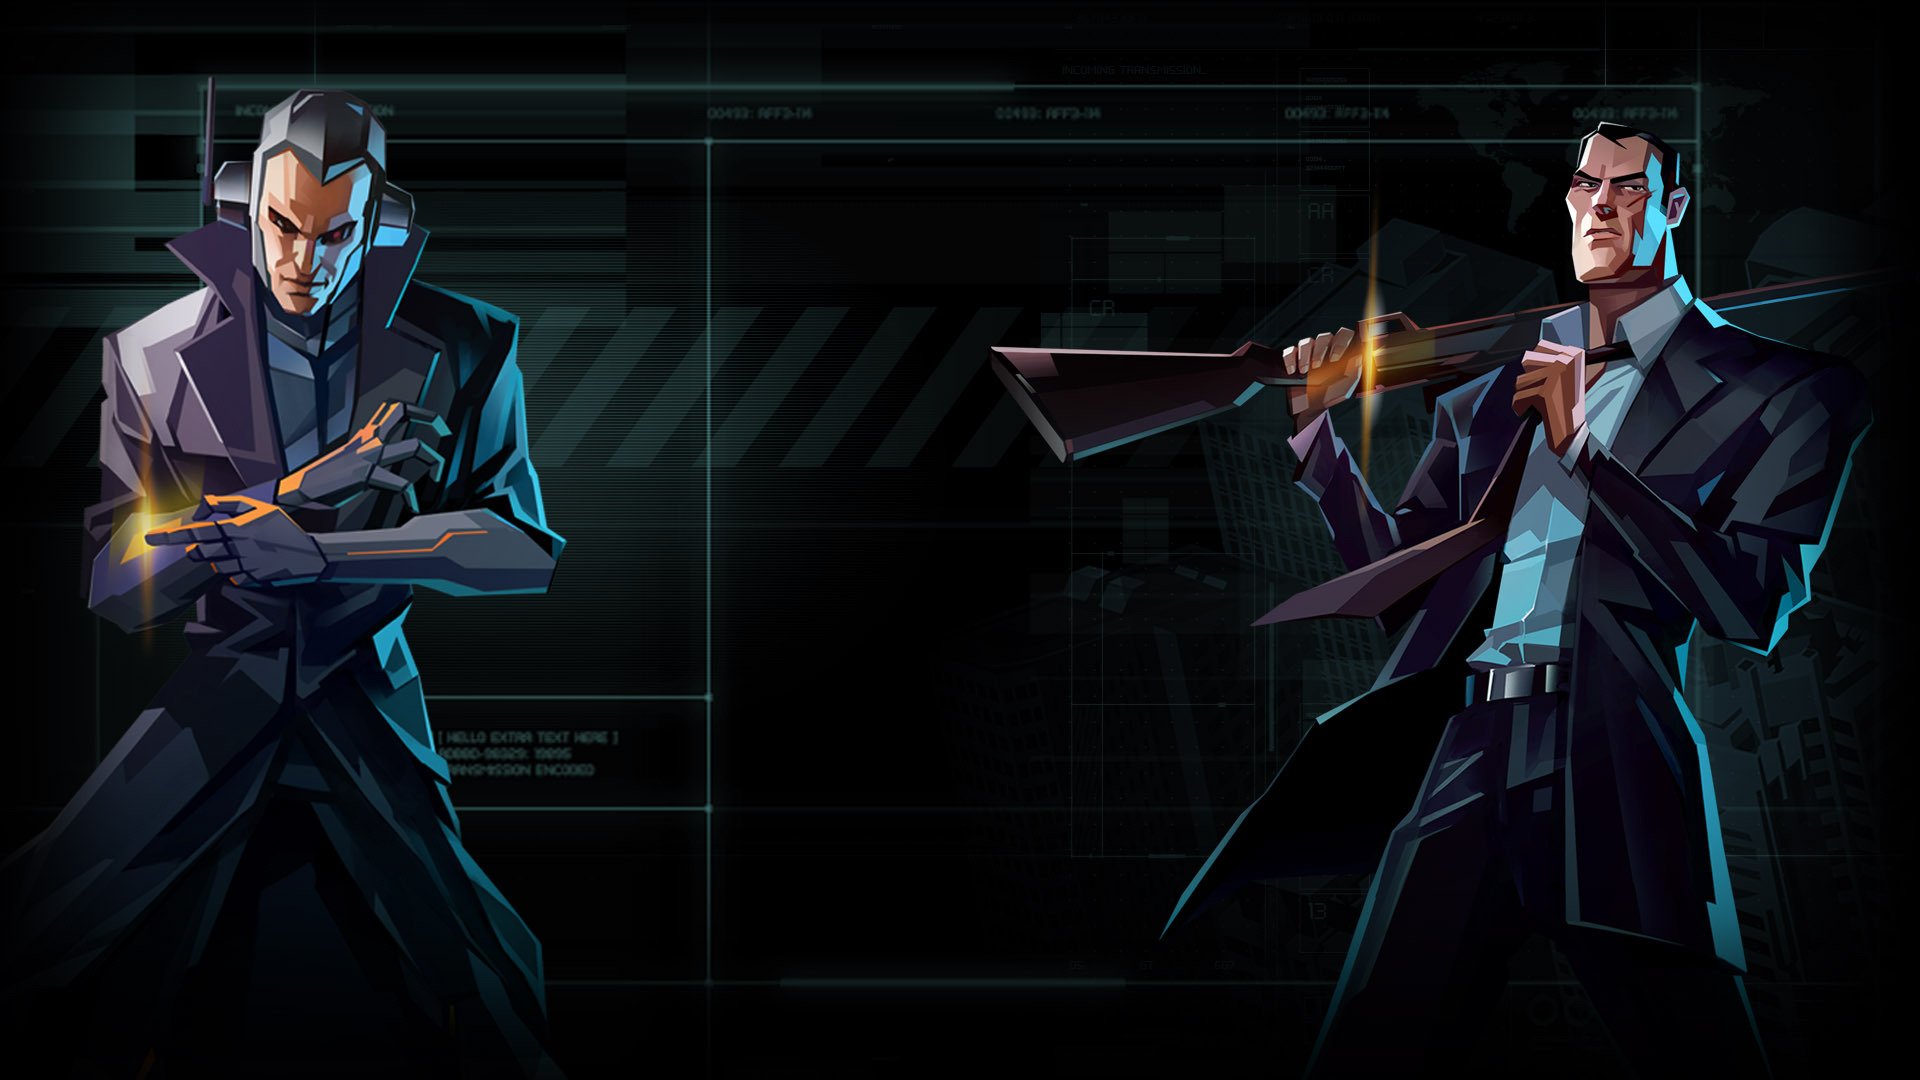 Invisible Inc Full Hd Wallpaper And Background Image HD Wallpapers Download Free Images Wallpaper [wallpaper981.blogspot.com]